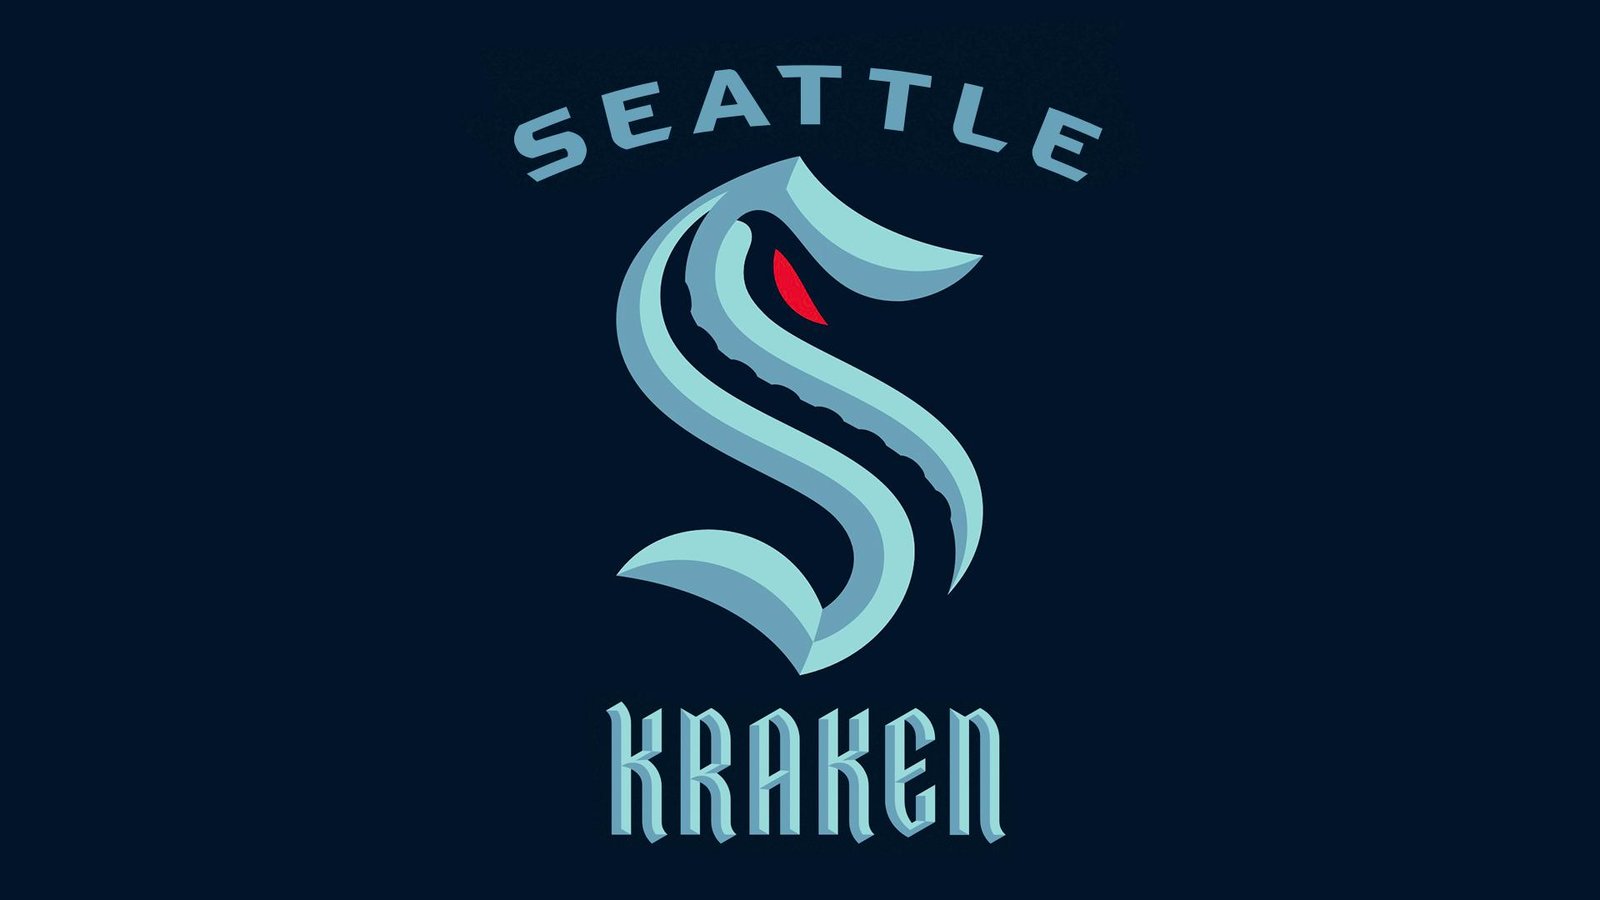 A potential third jersey for the Seattle Kraken?